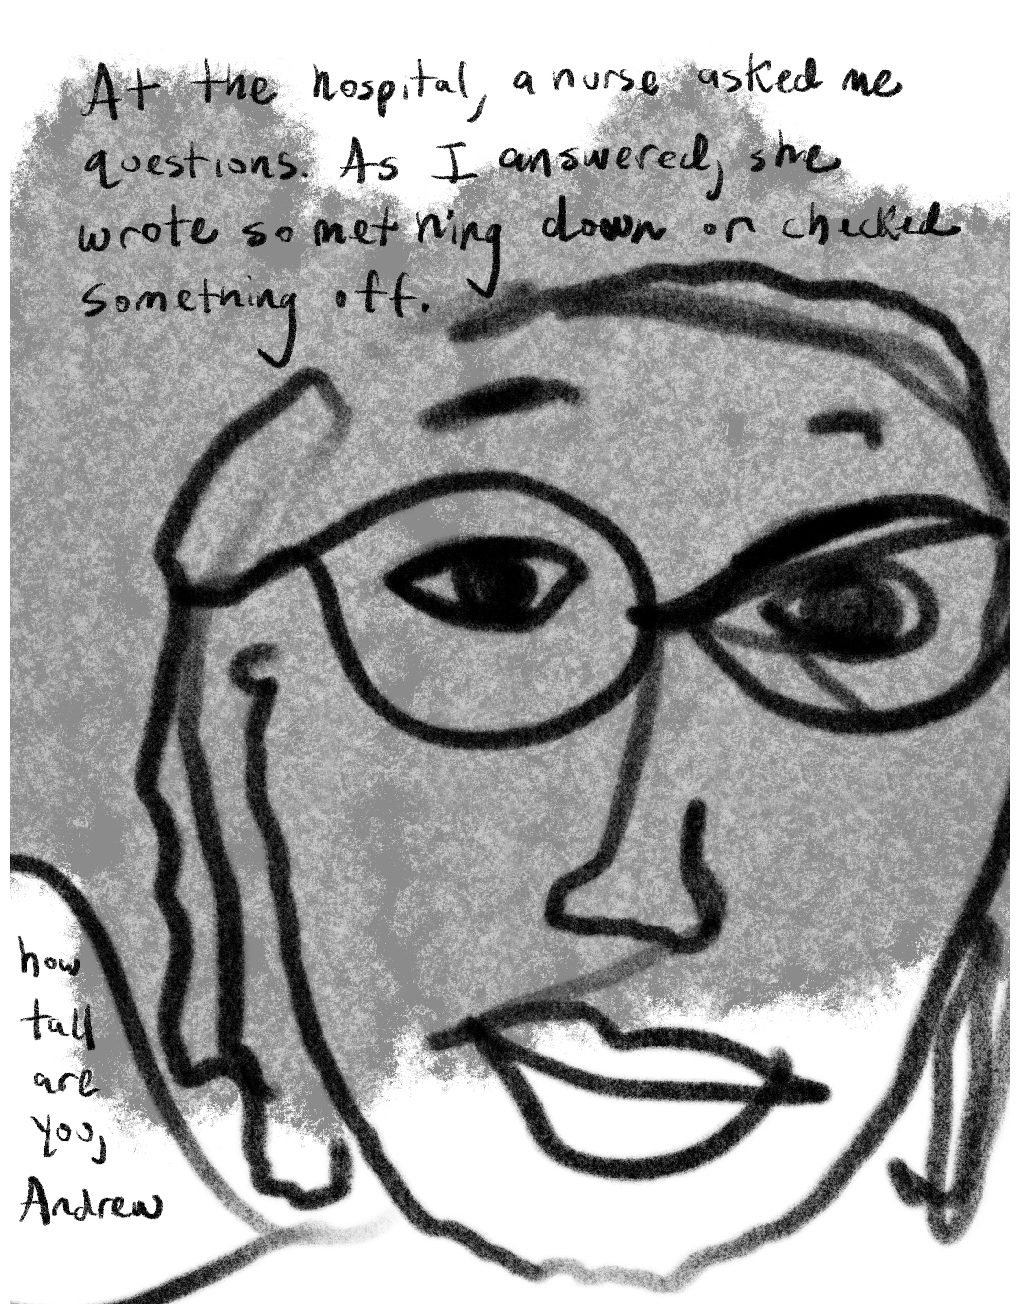 Panel three of a four-panel comic called 'From psychotic to patient', consisting of thick black line drawing and hand written text against a grey and white mottled background. The crudely drawn head of a woman fills most of the panel. She has glasses and shoulder-length hair. She is looking directly at the viewer. A speech bubble coming from her says "How tall are you, Andrew". Text at the top of the panel, above her head reads "At the hospital, a nurse asked me questions. As I answered, she wrote something down or checked something off."